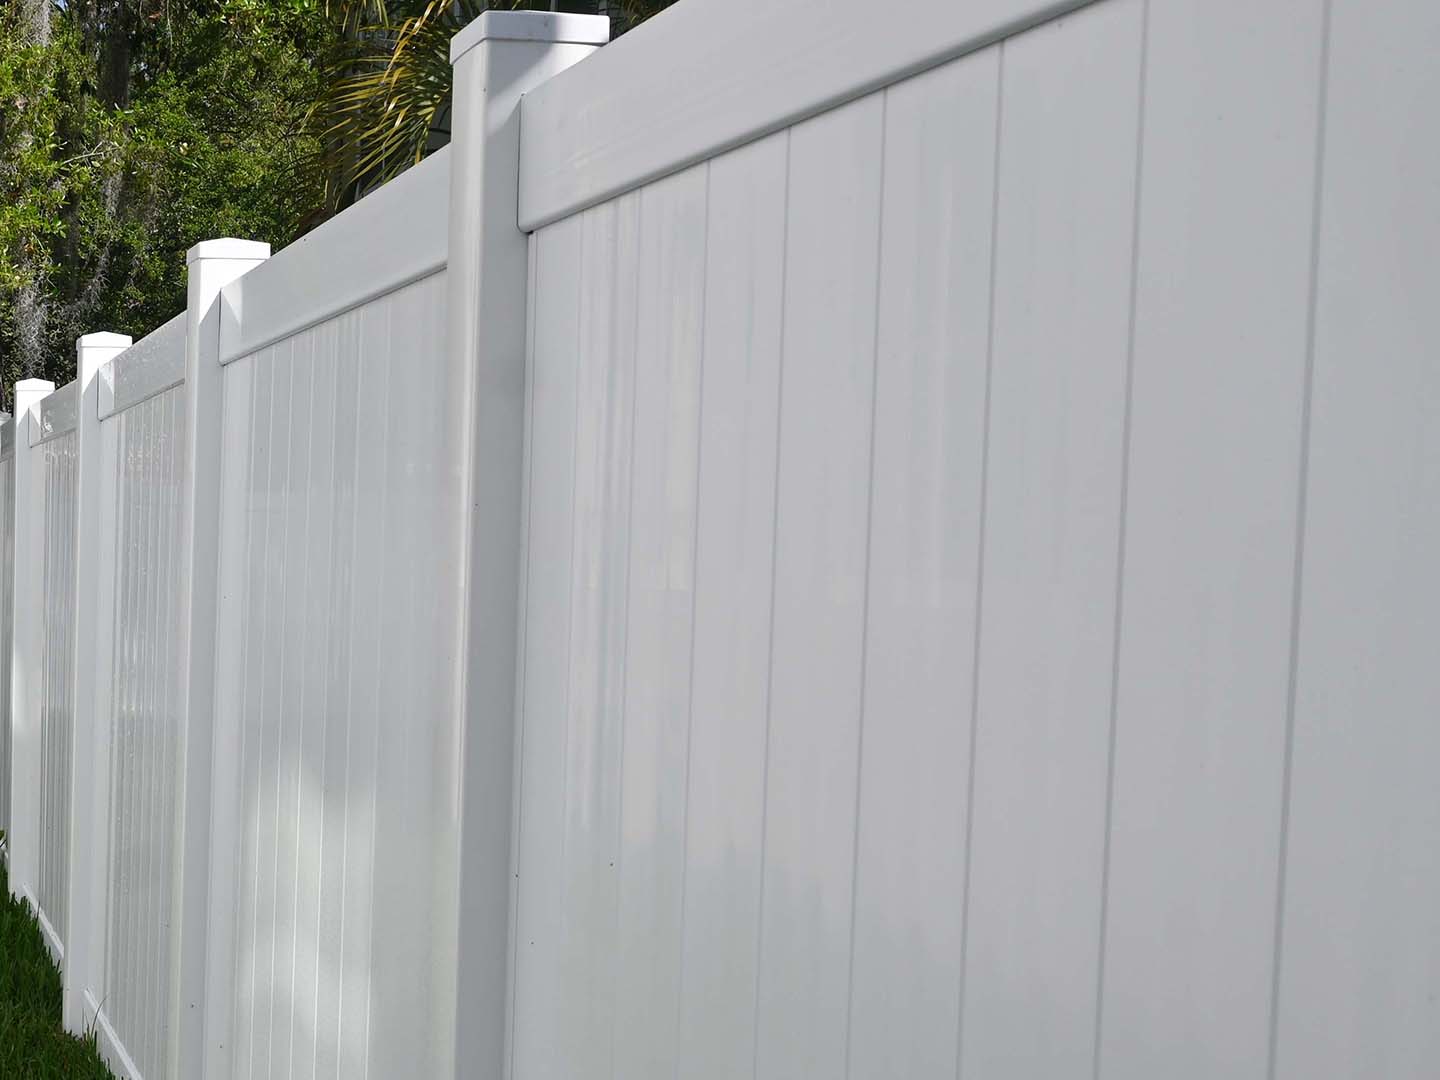 Mulberry Florida vinyl privacy fencing